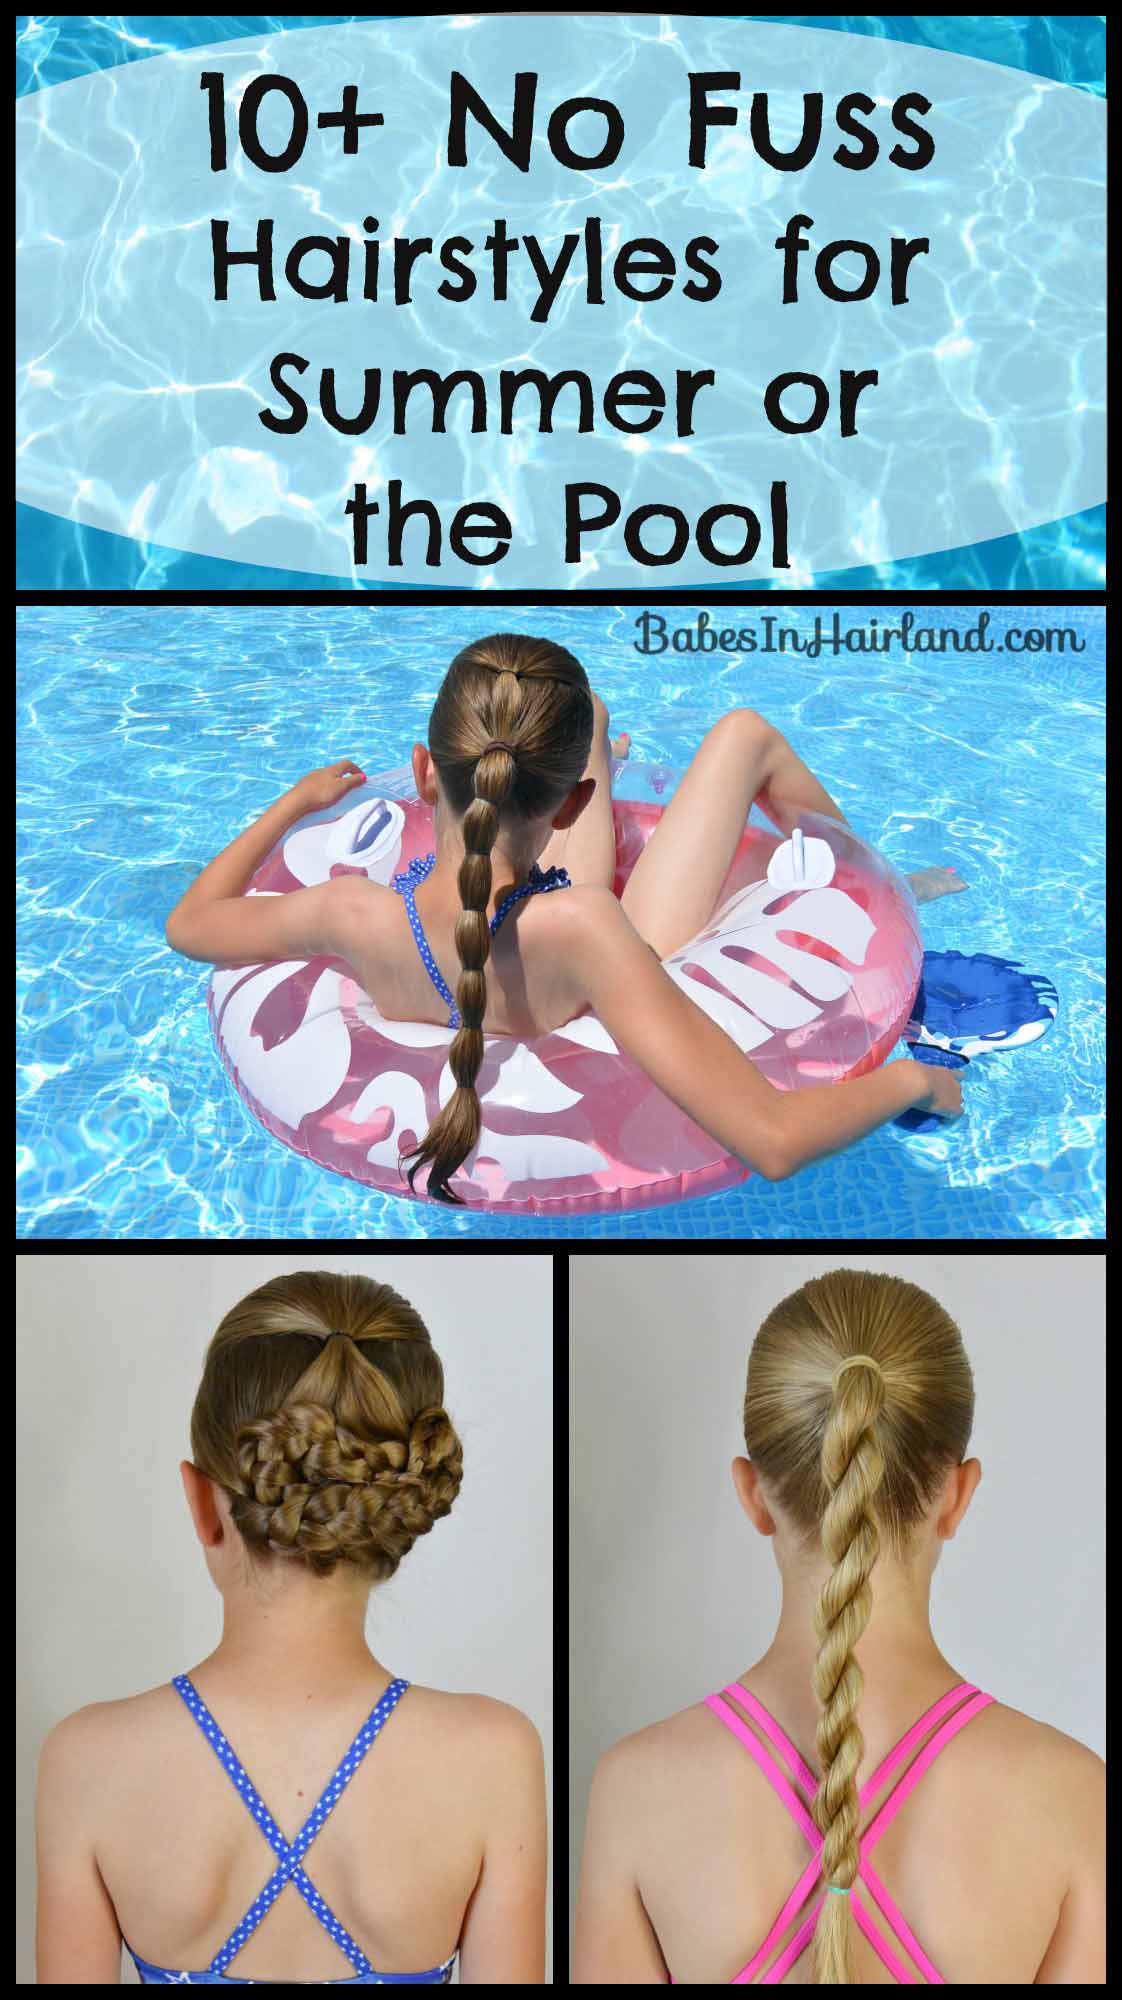 10+ no fuss hairstyles for summer or the pool - babes in